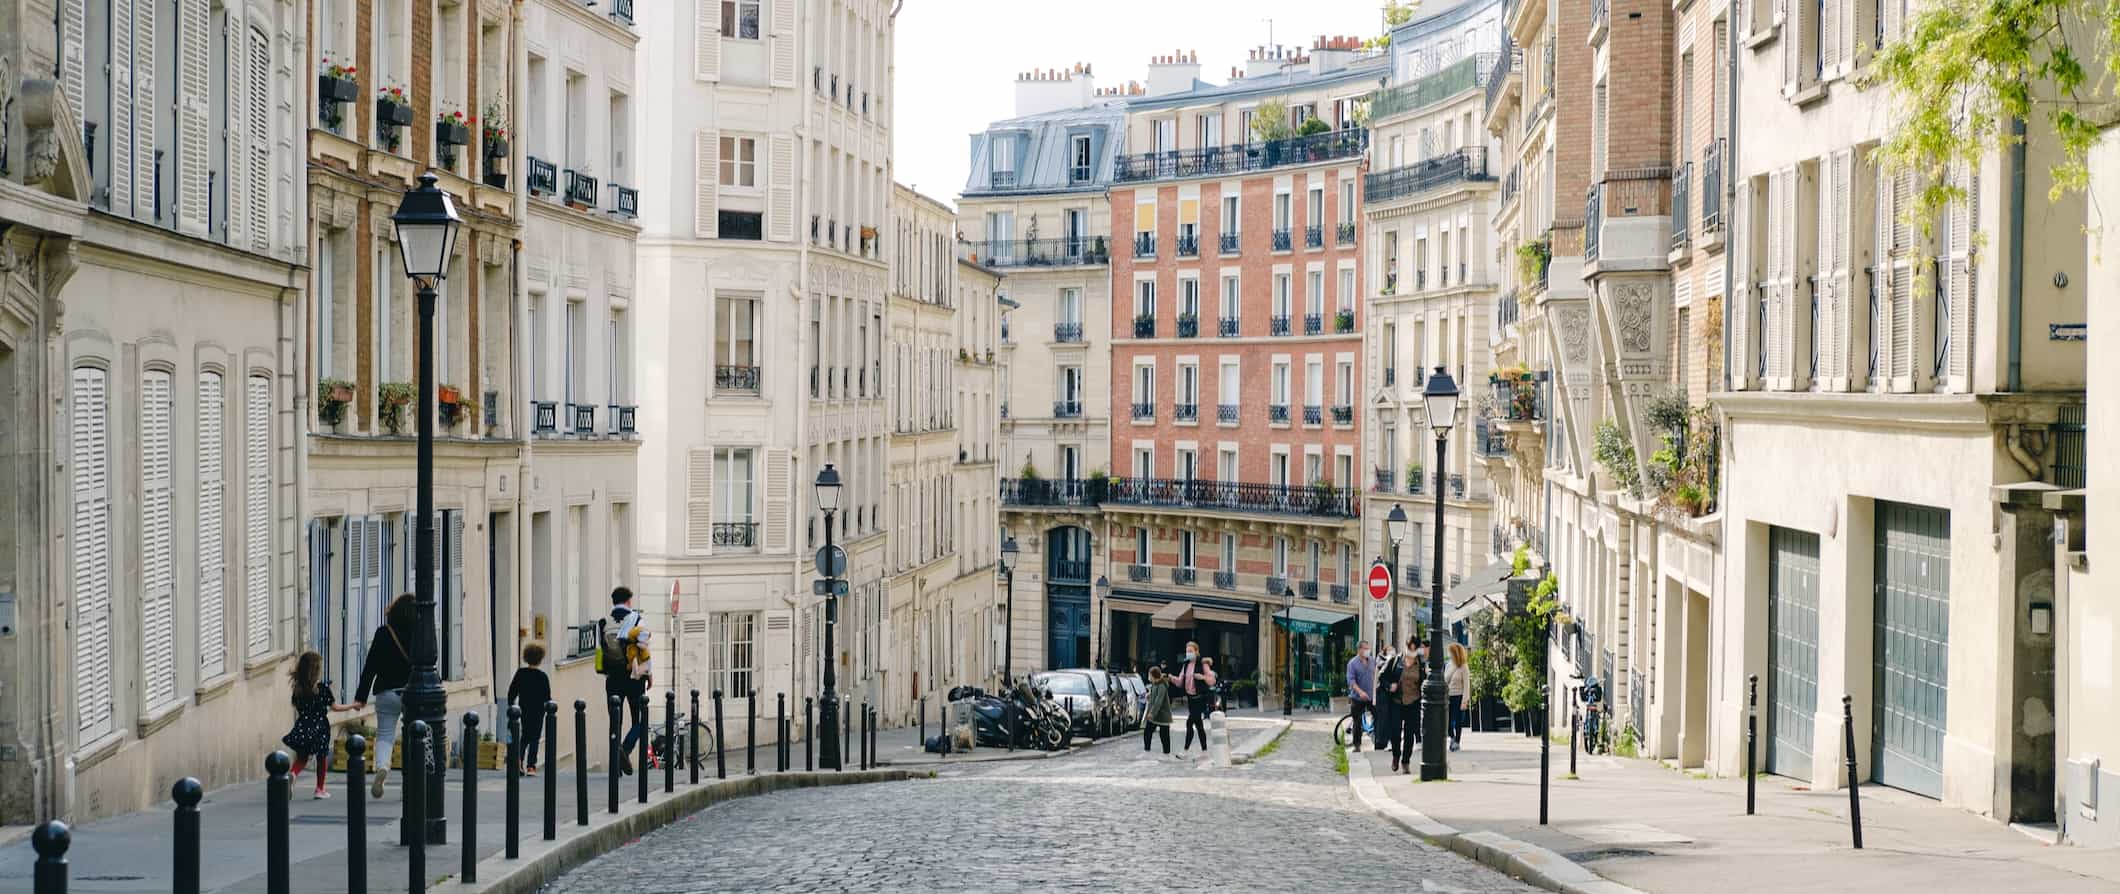 A quiet street and old apartment buildings in Paris, France